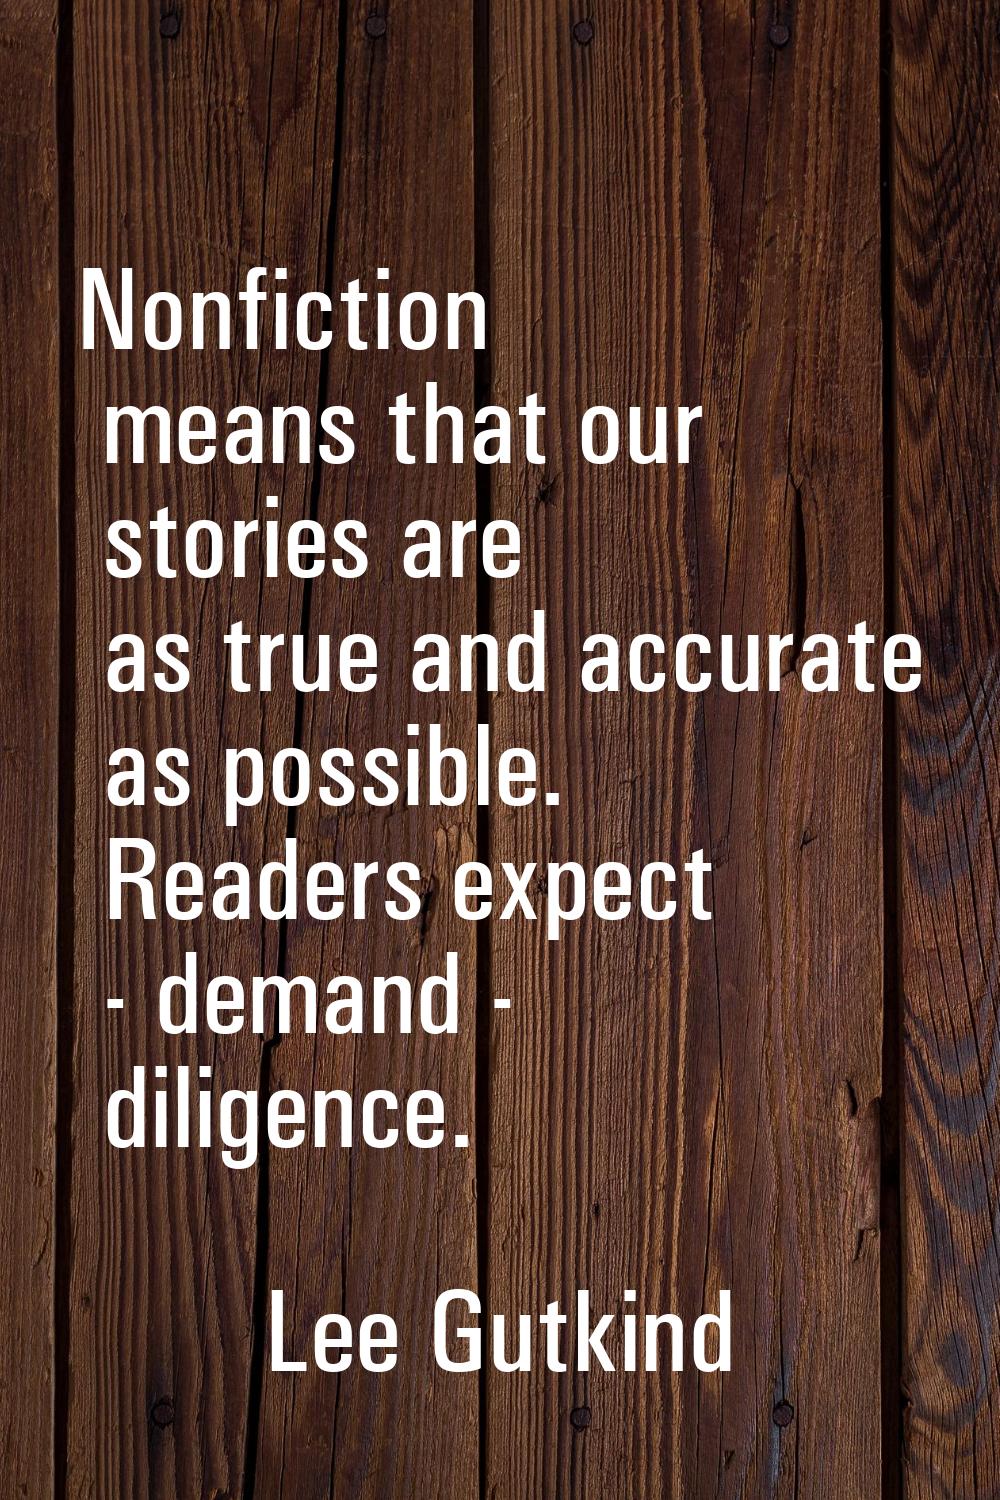 Nonfiction means that our stories are as true and accurate as possible. Readers expect - demand - d